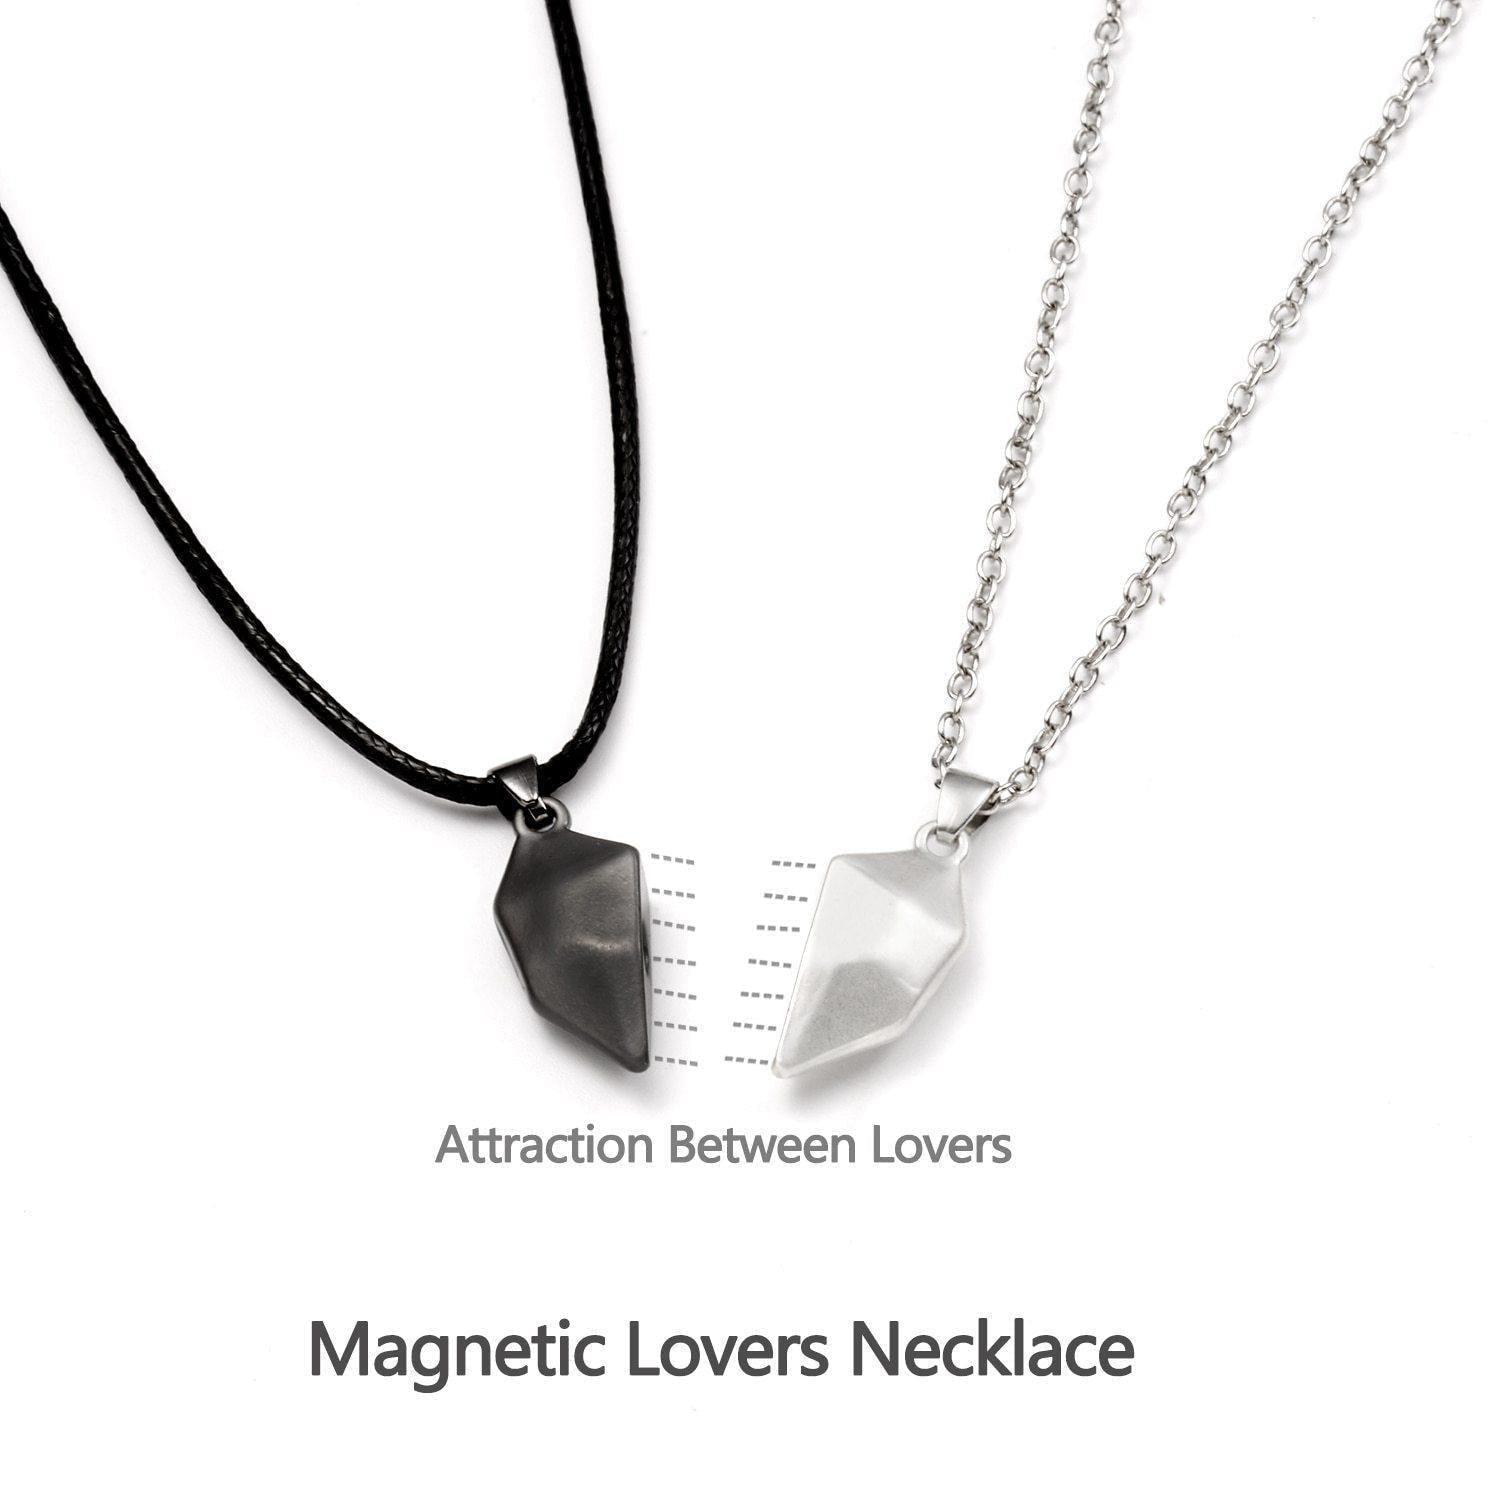 Couple Pendant Necklaces Gift To My Girlfriend in 2023 | Couple Pendant Necklaces Gift To My Girlfriend - undefined | gift ideas, Magnetic Couple Necklace, necklace, Necklaces | From Hunny Life | hunnylife.com